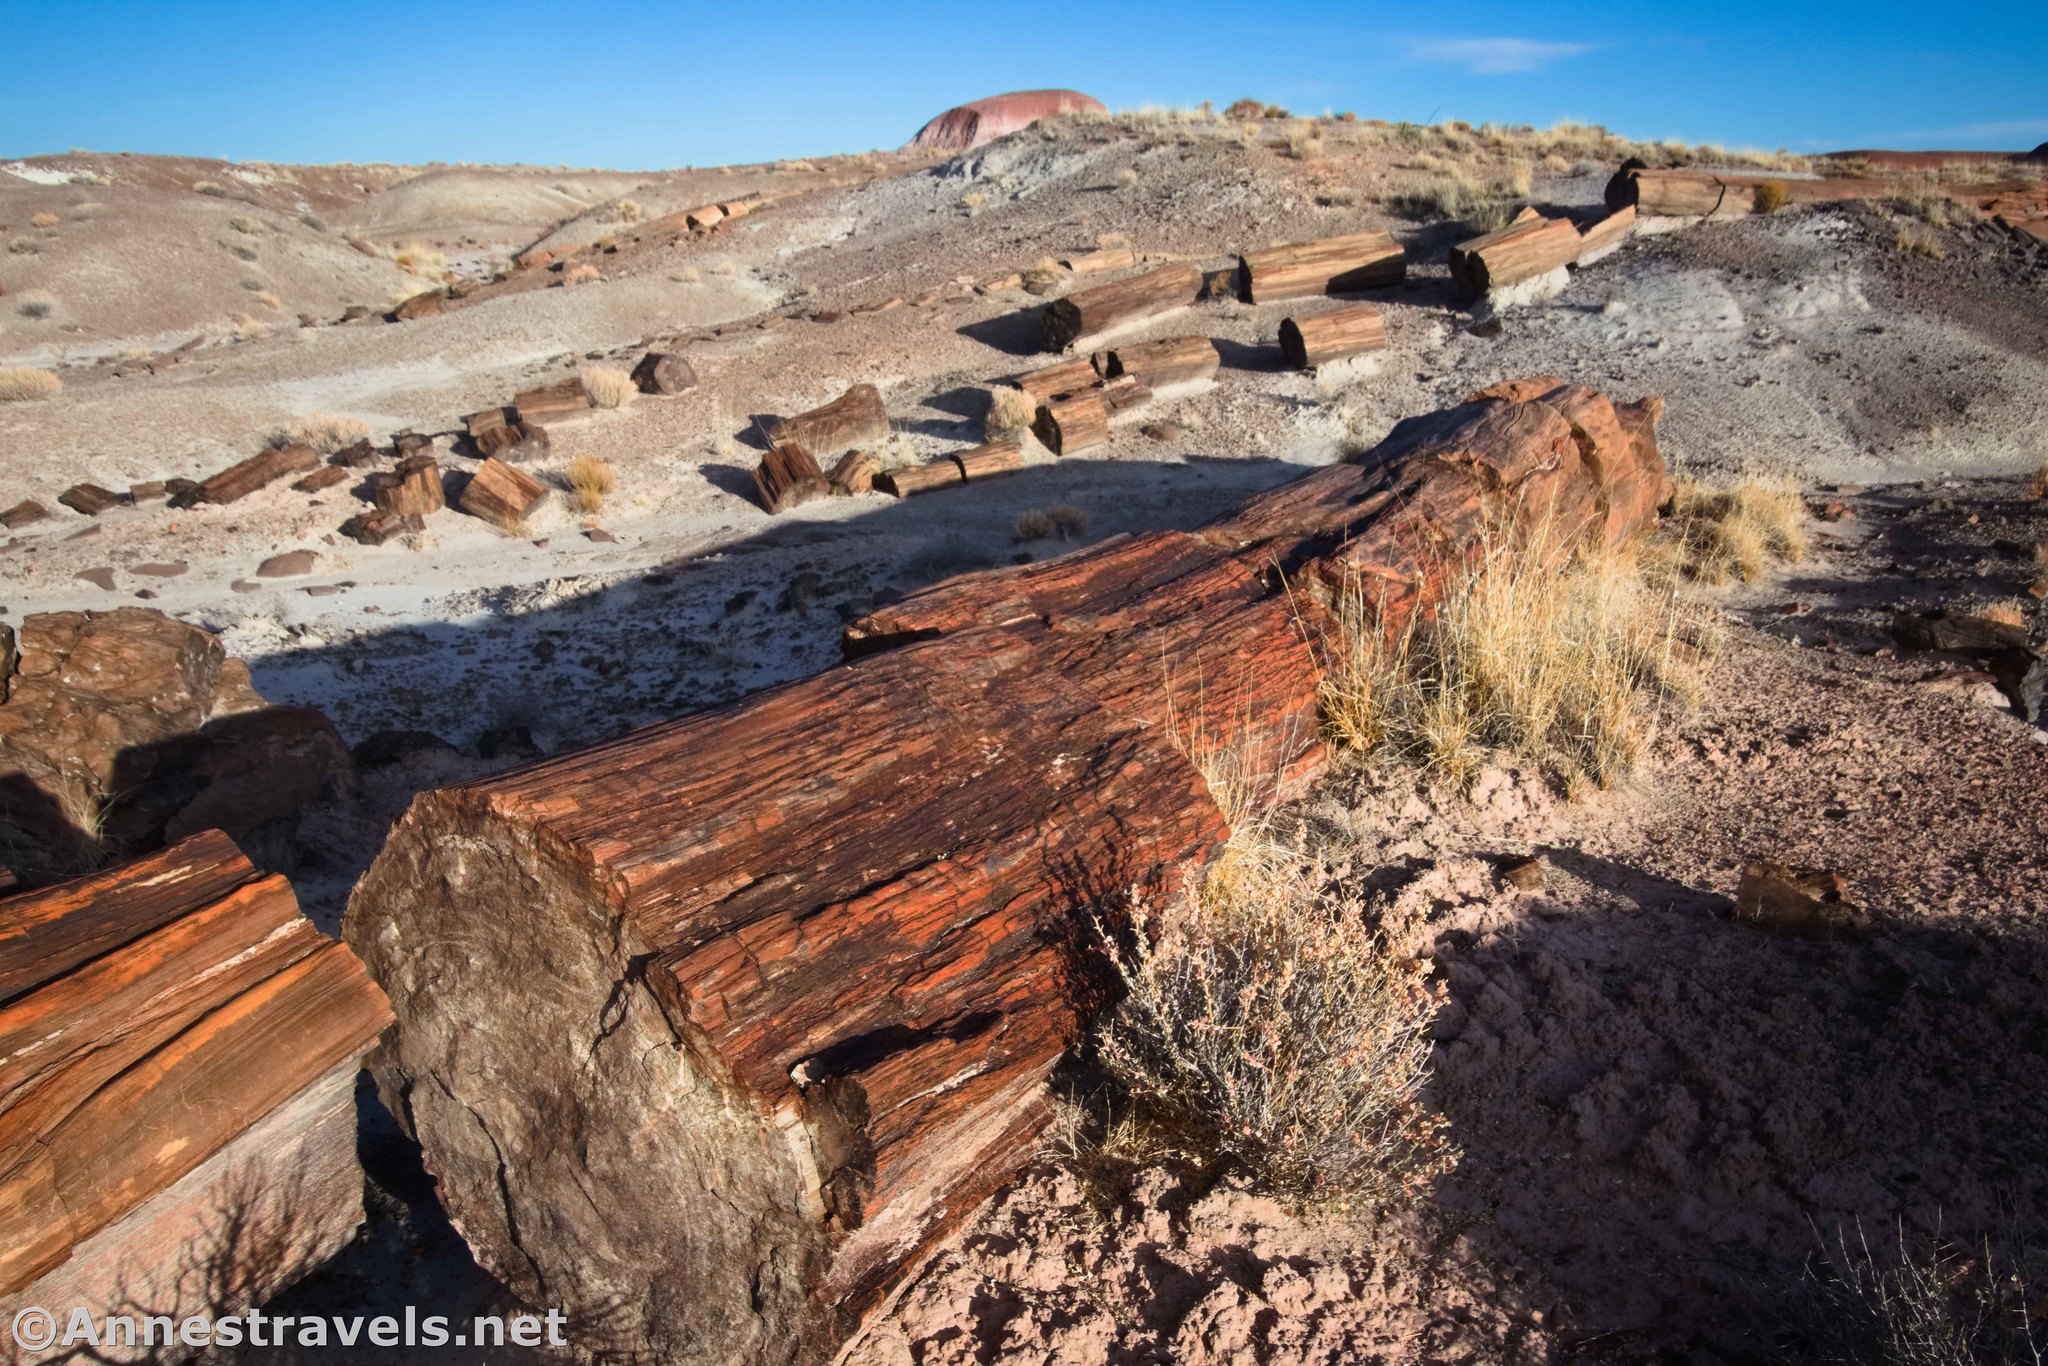 Petrified wood in Chalcedony Forest along the Wilderness Route, Petrified Forest National Park, Arizona